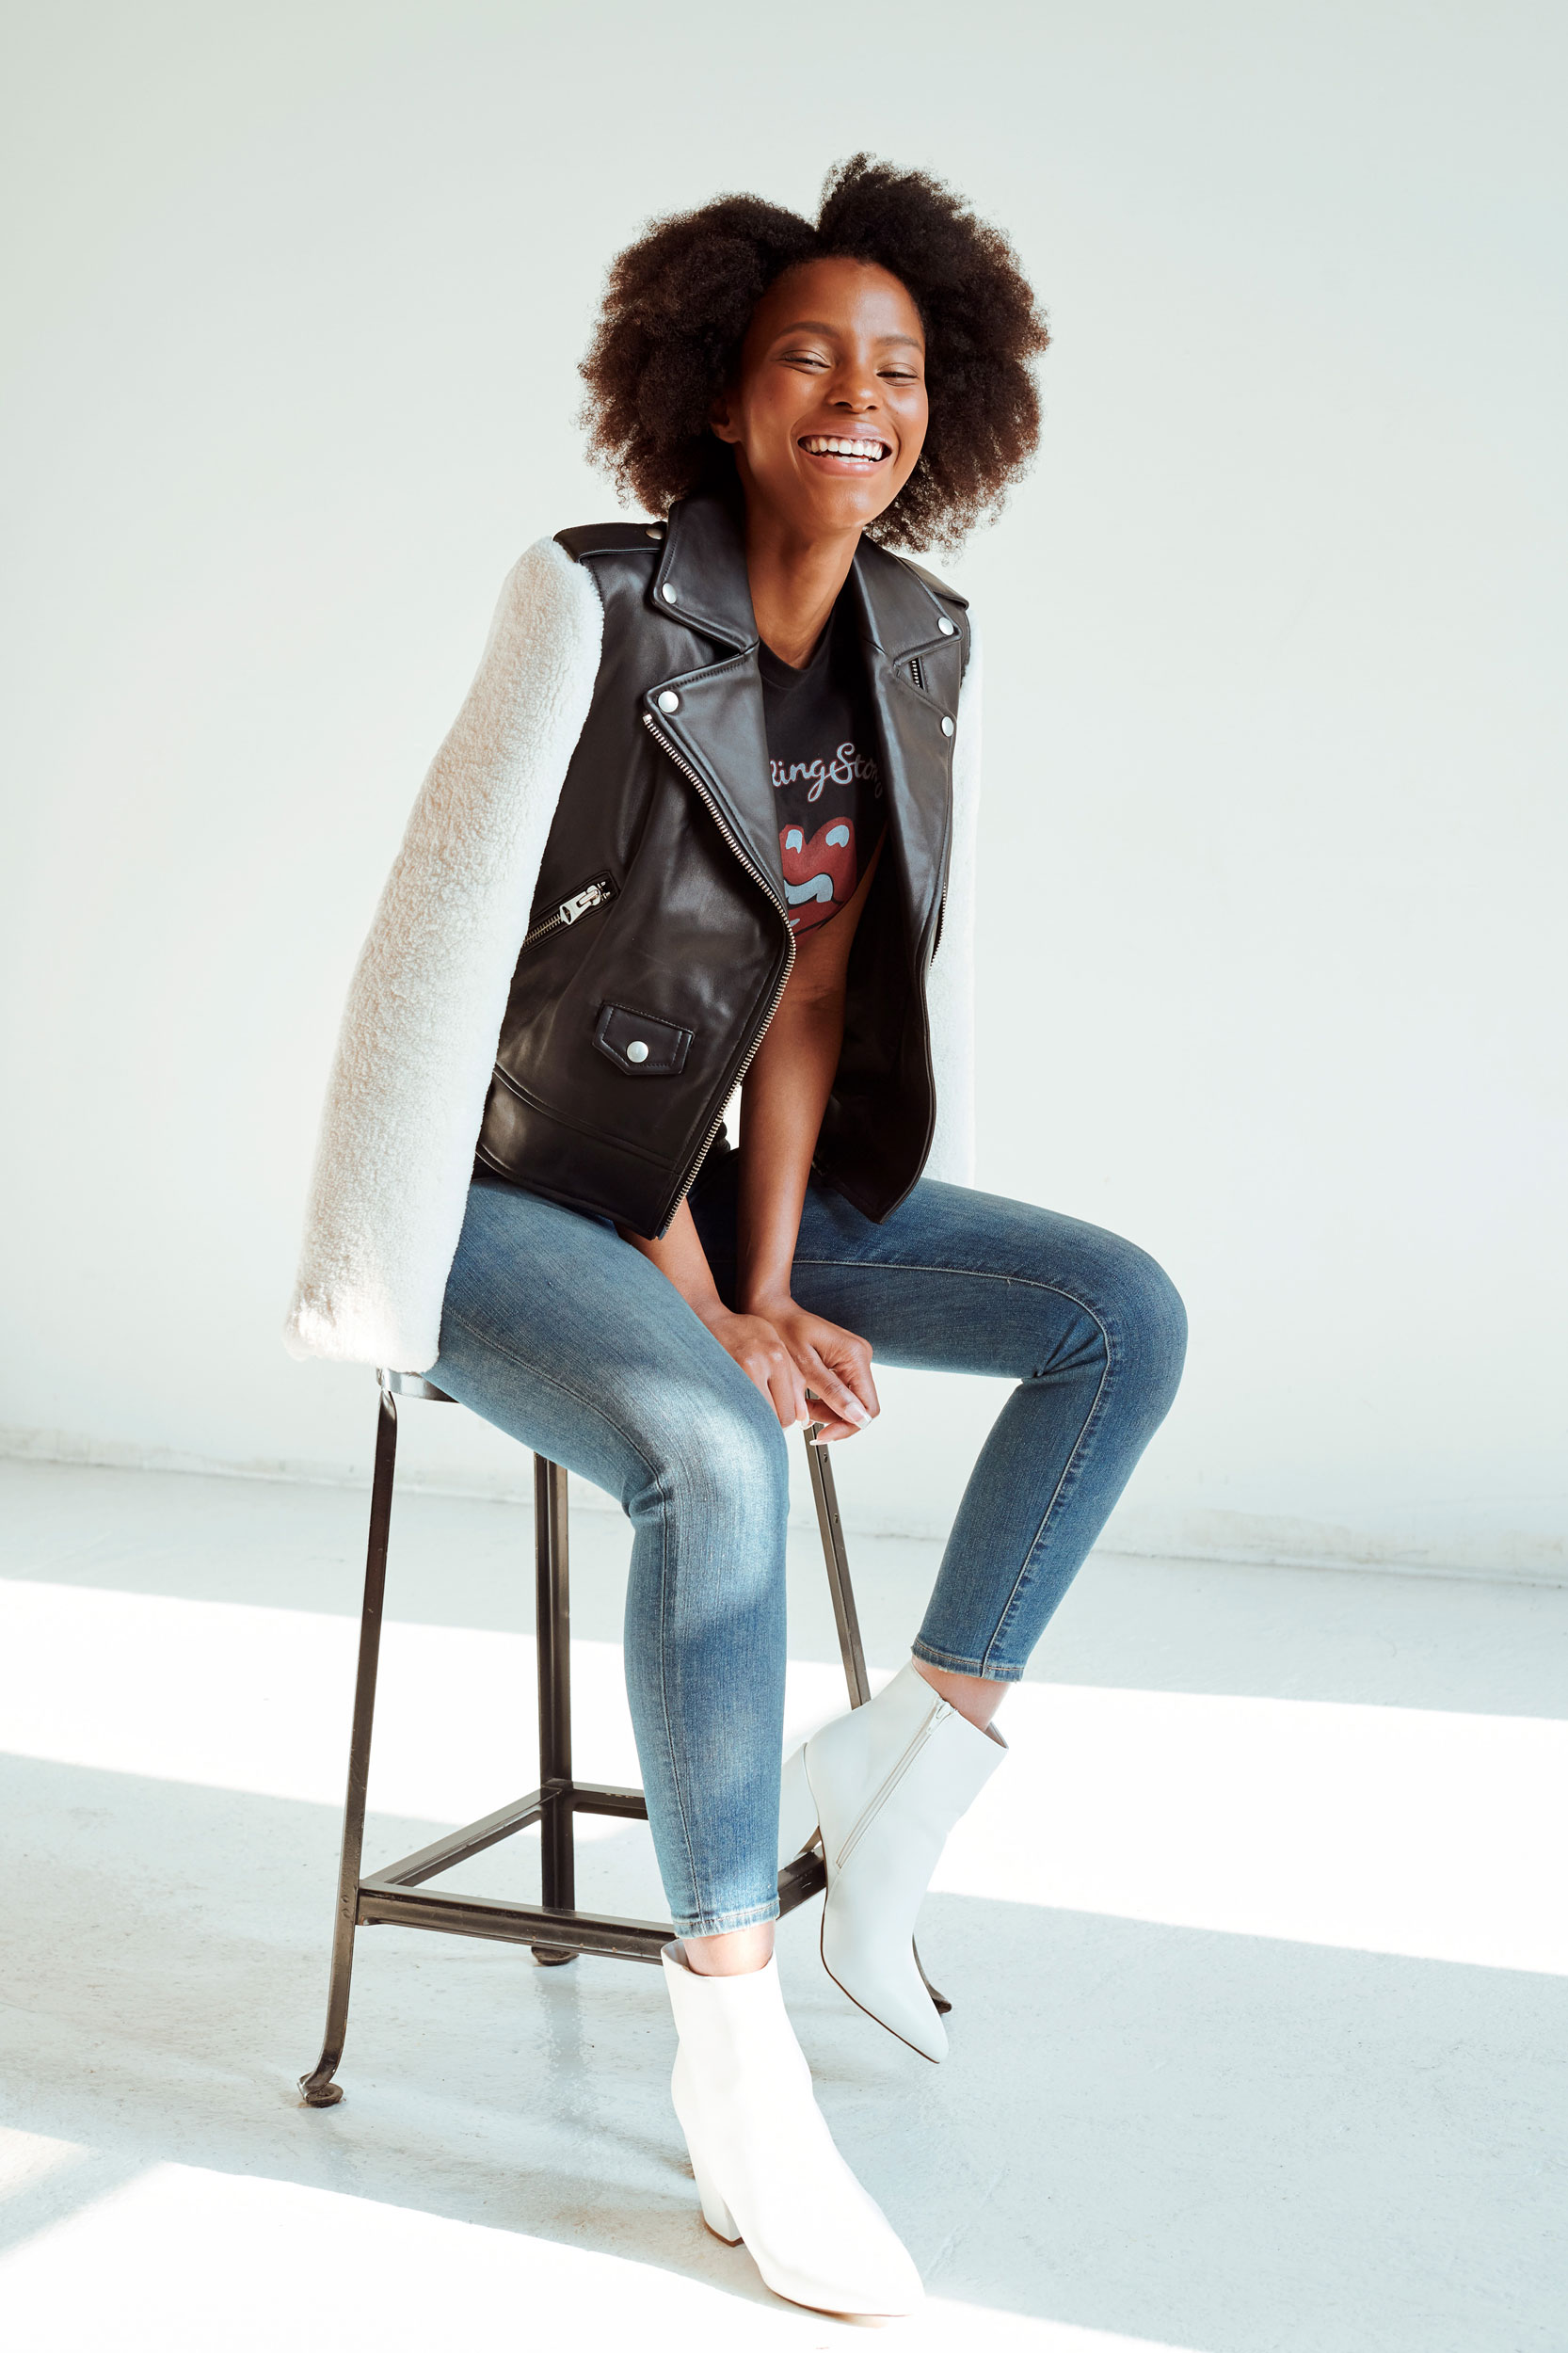 Laughing female styled in Rolling Stones tee, leather jacket, jeans and white ankle boots